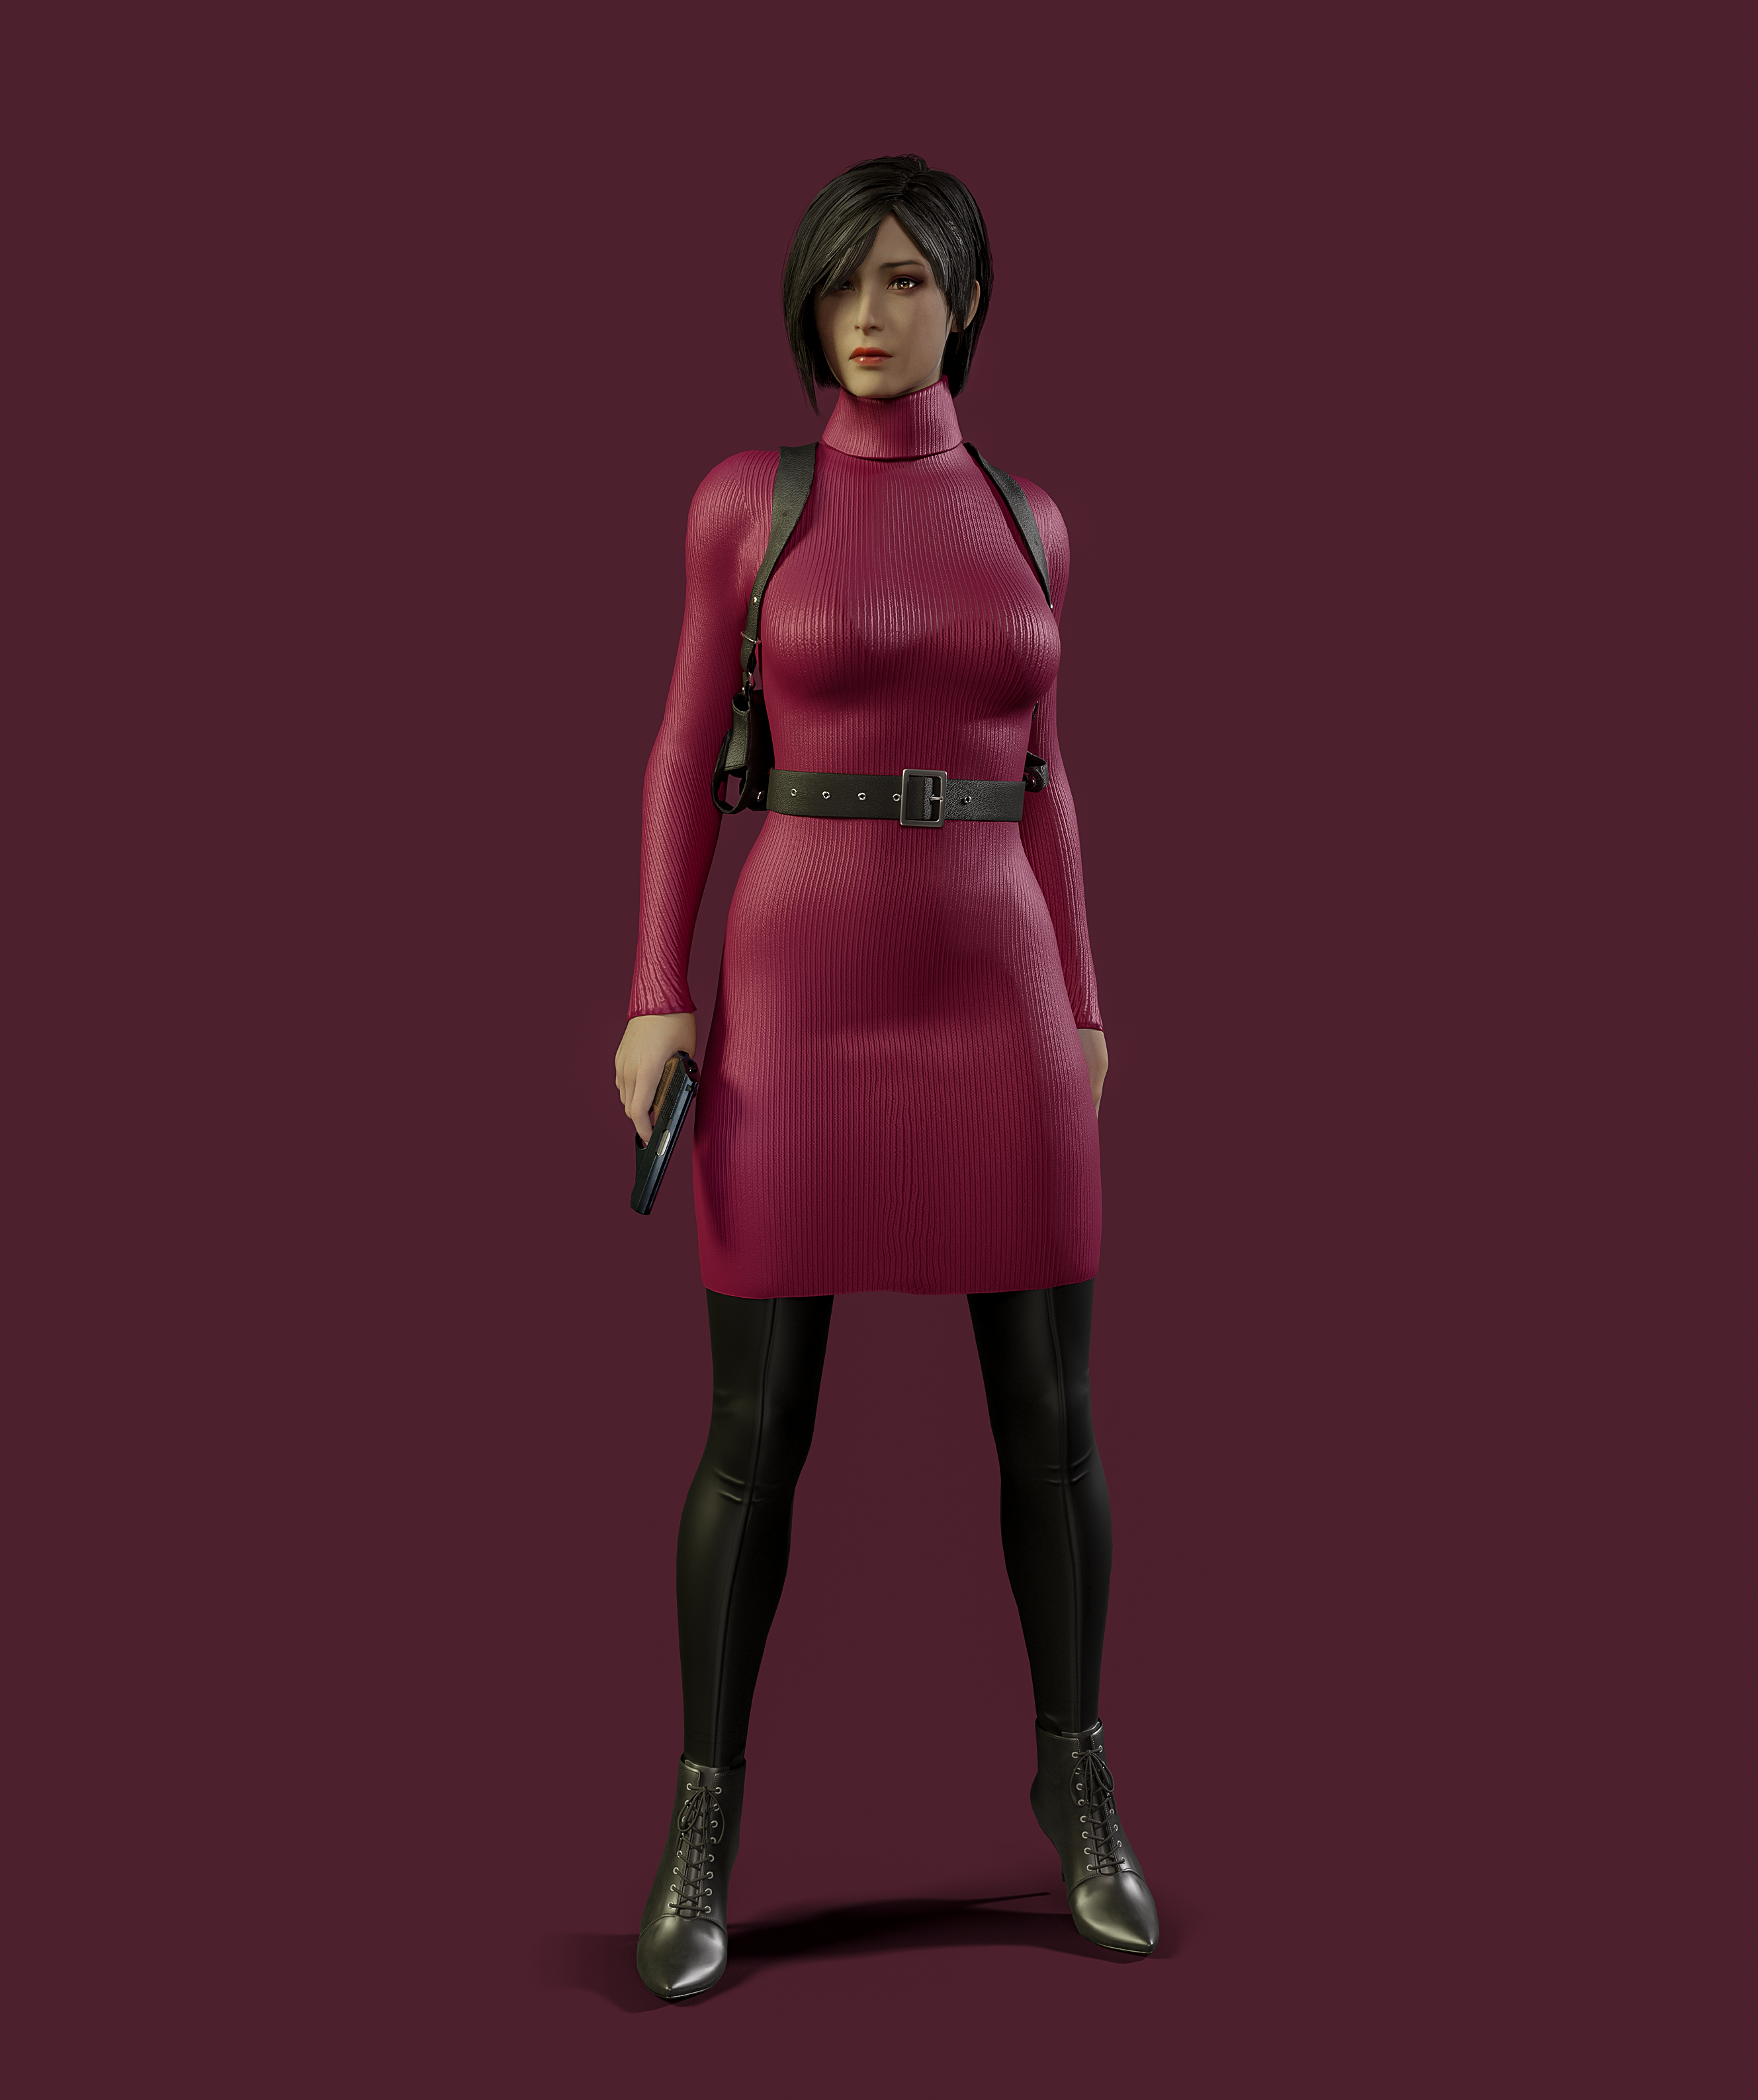 Ada Wong - RESIDENT EVIL 4 REMAKE [Add-On Ped